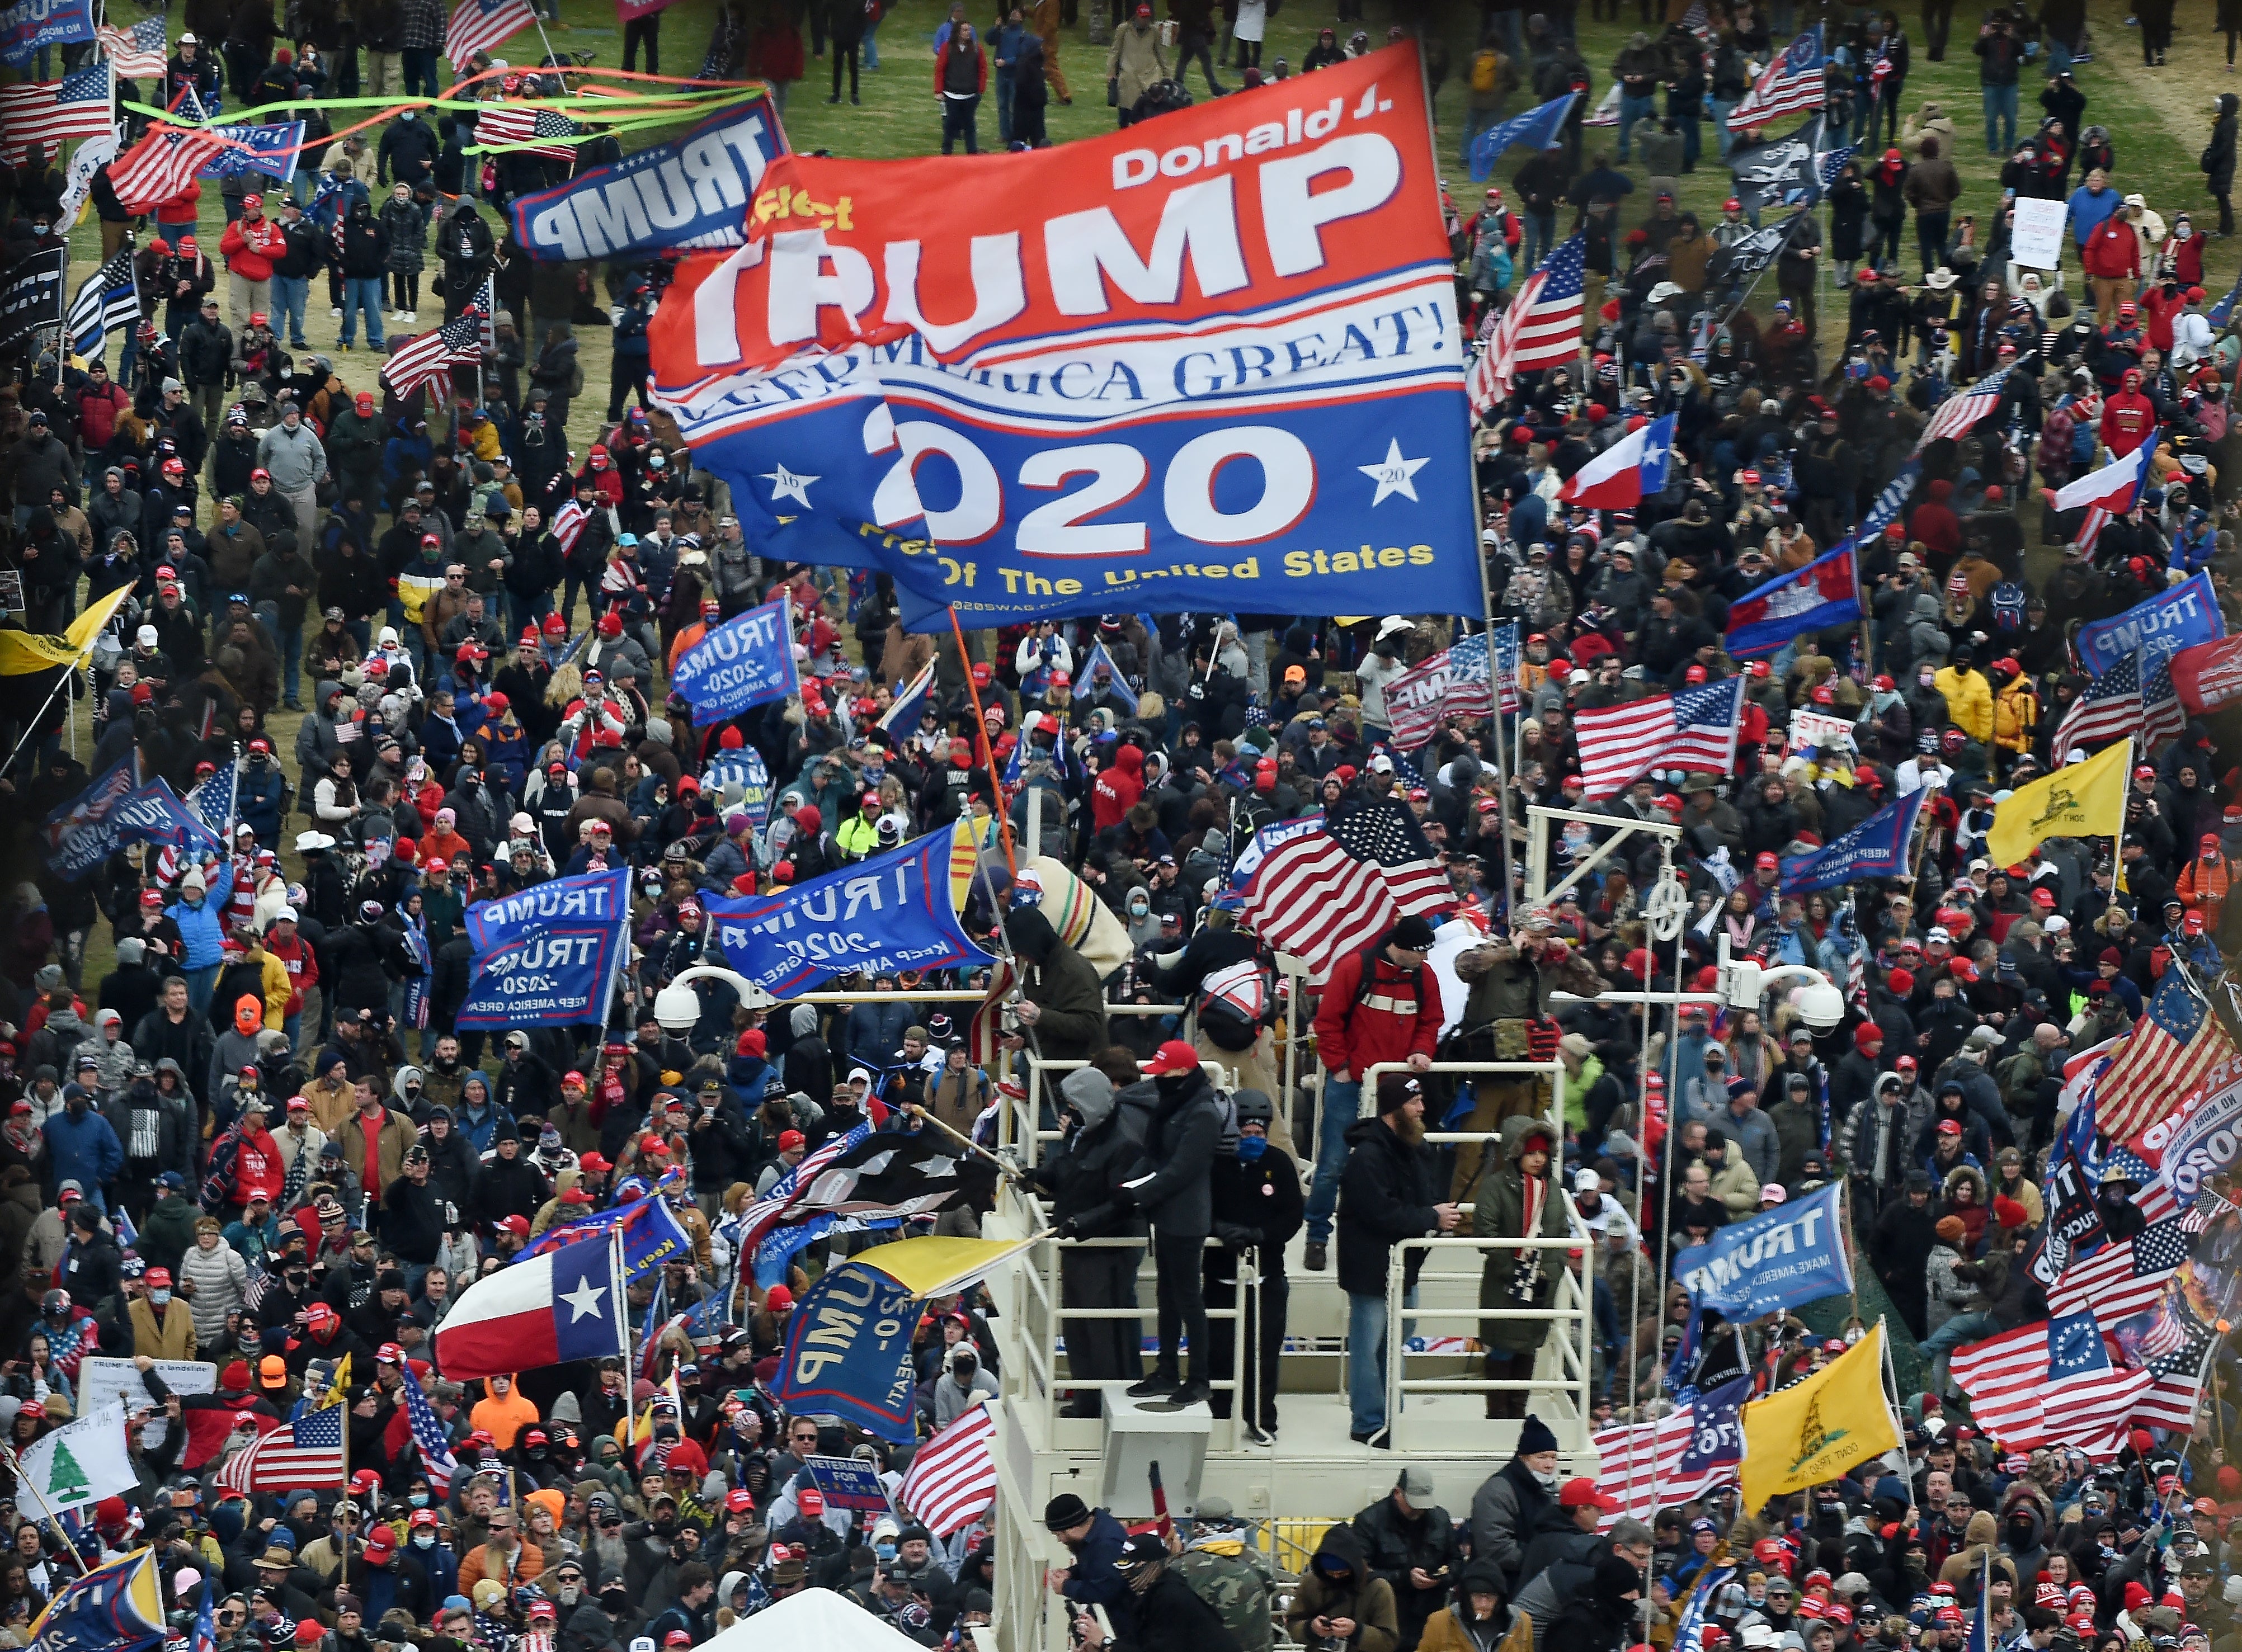 Donald Trump’s supporters overwhelmed the US Capitol before breaching the halls of Congress to stop the certification of the 2020 election on 6 January, 2021.